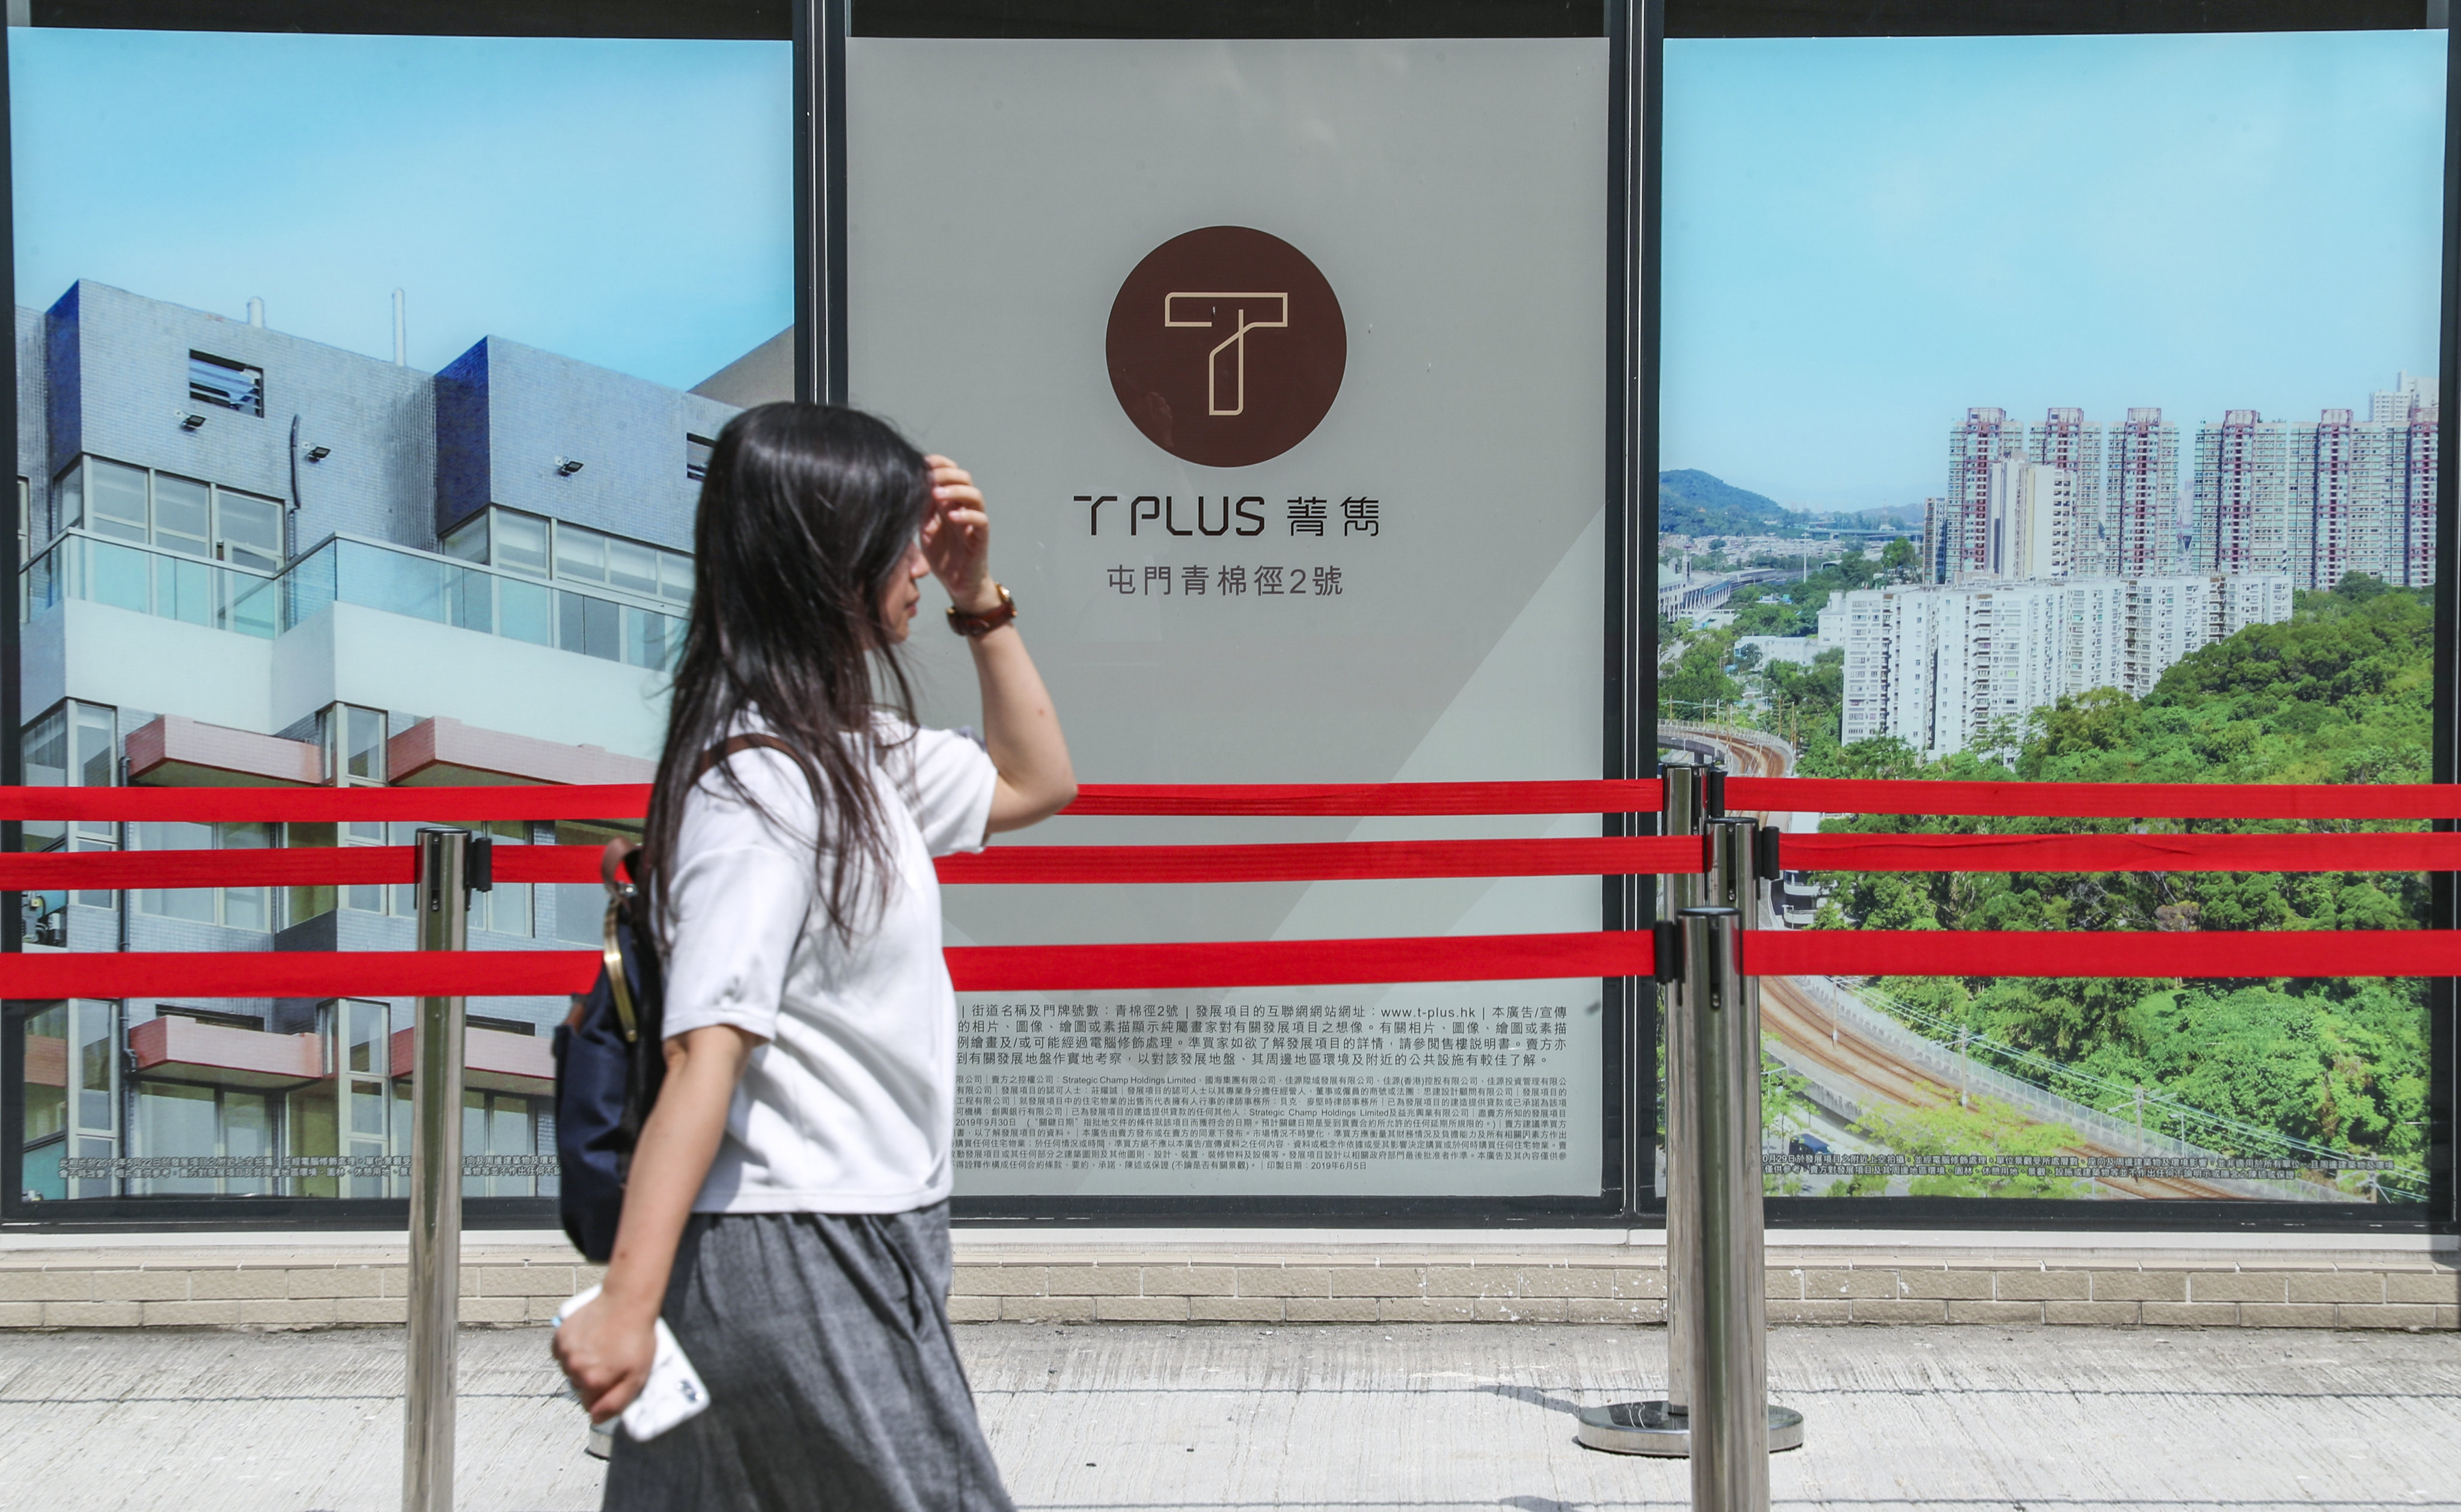 Jiayuan International is the co-developer of the T-Plus micro-home residential project in Tuen Mun. Photo: Edward Wong